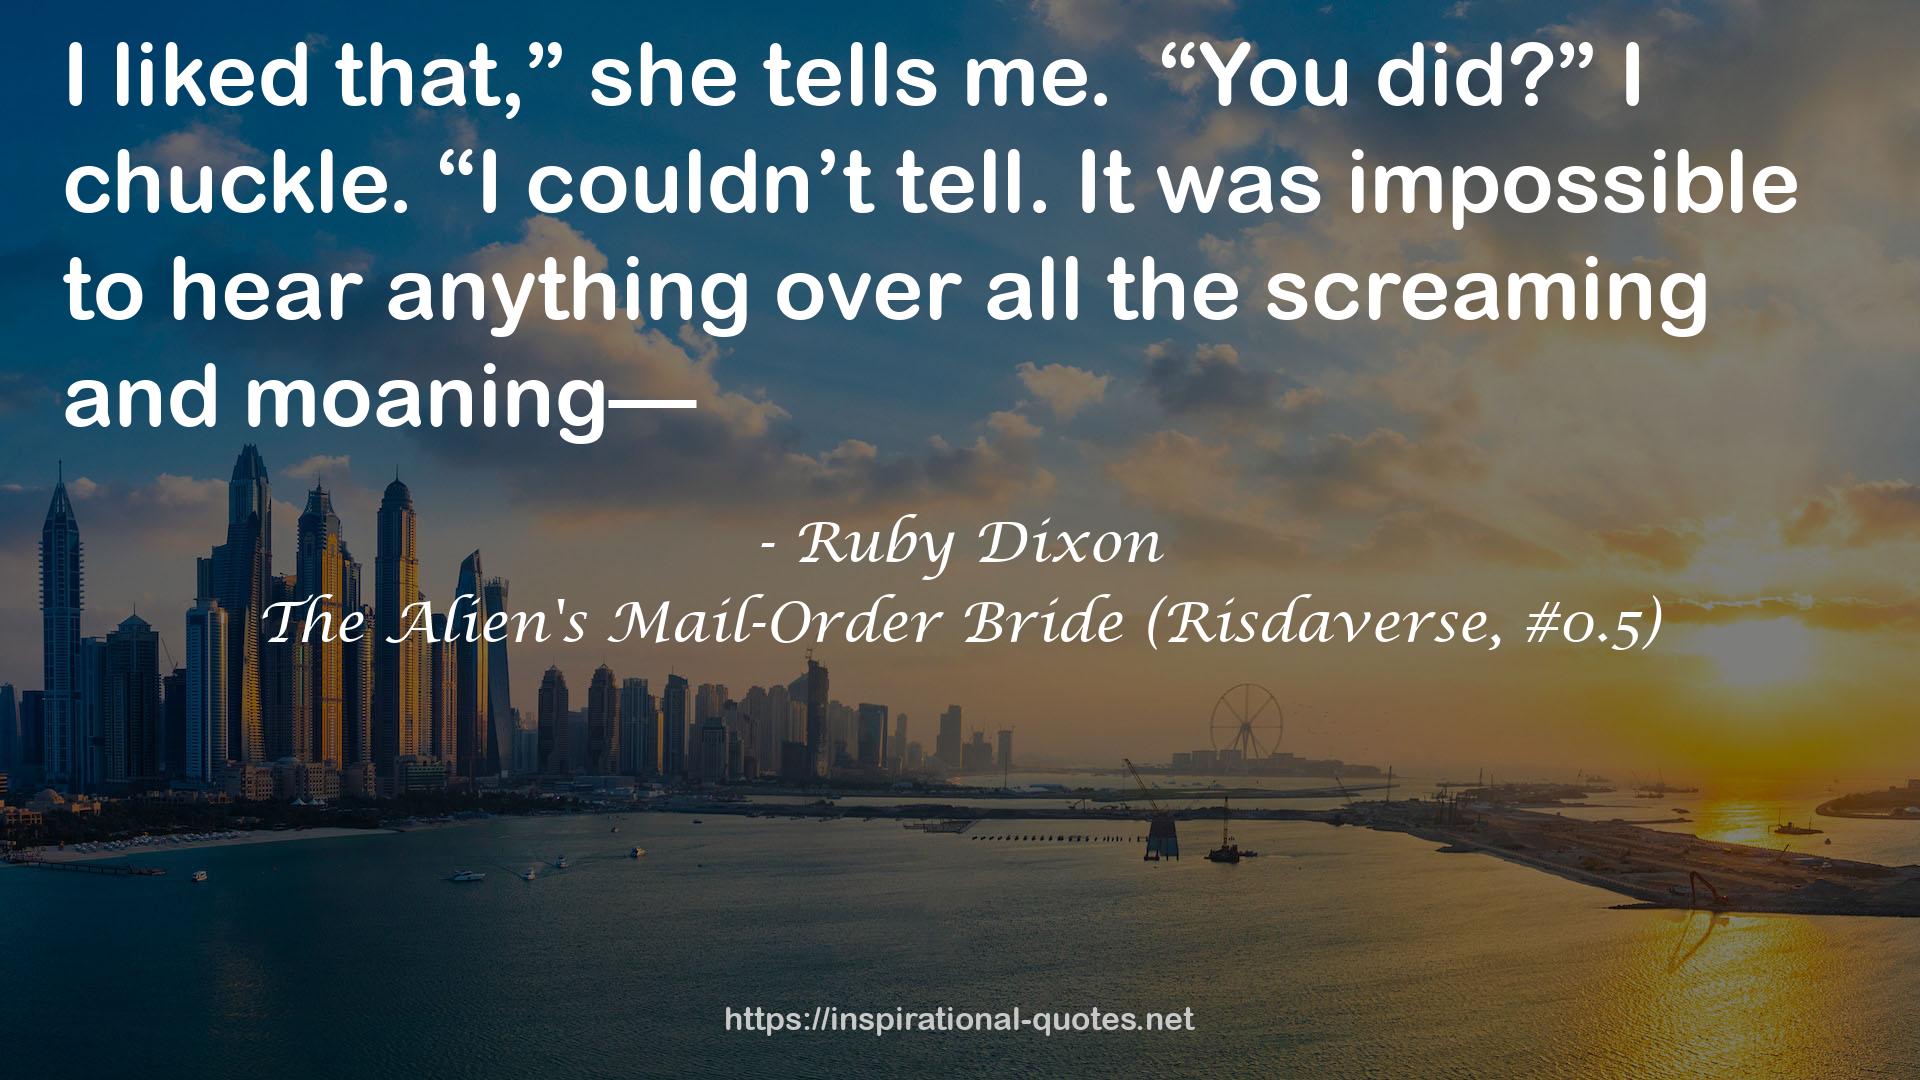 The Alien's Mail-Order Bride (Risdaverse, #0.5) QUOTES